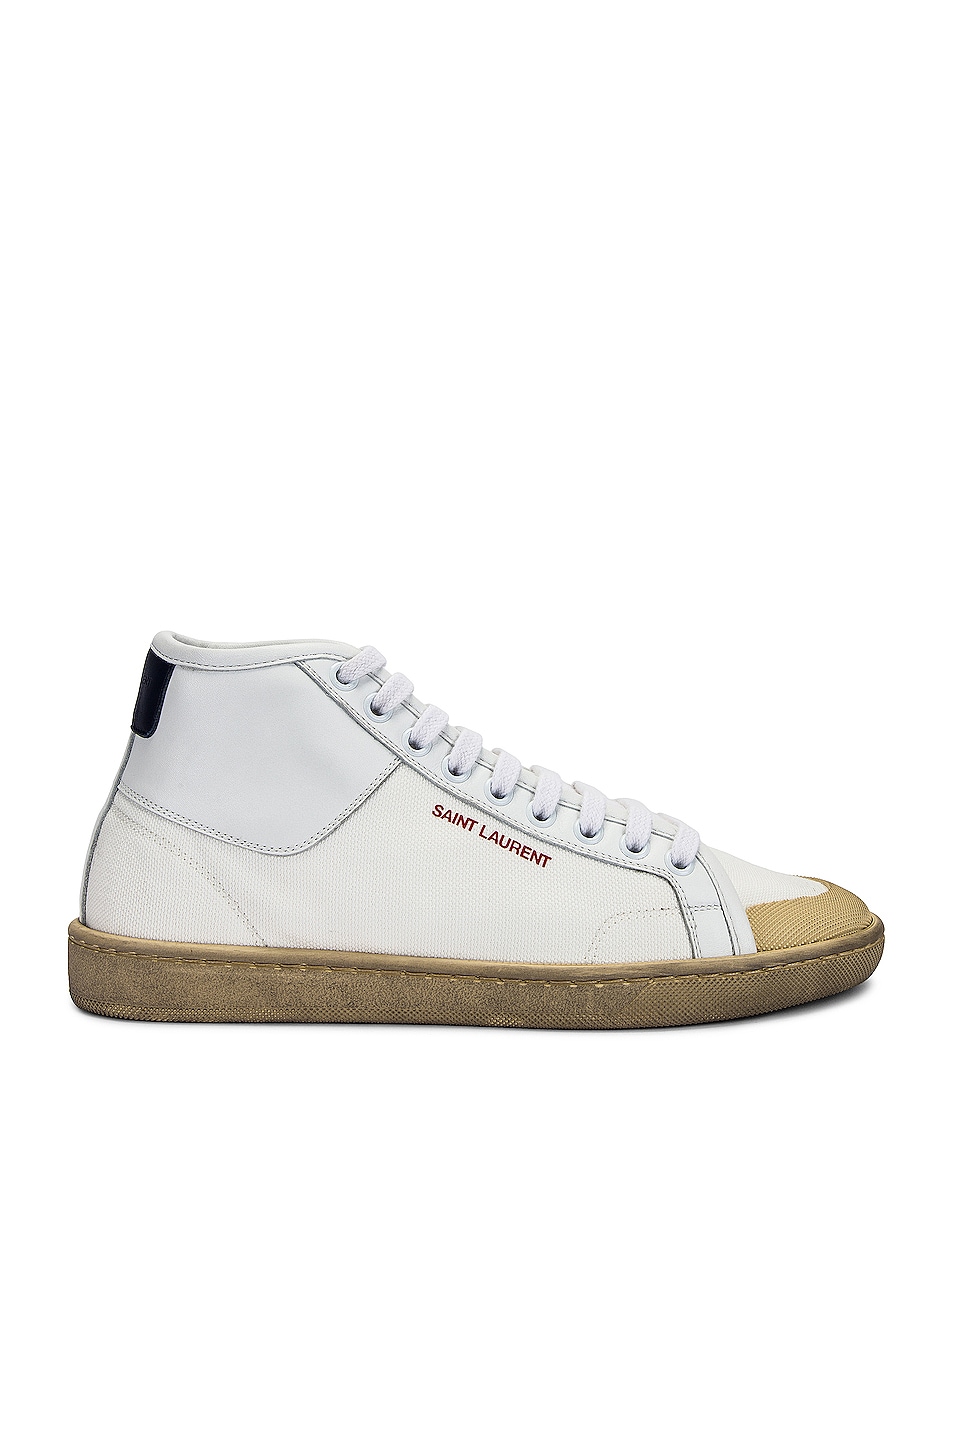 Image 1 of Saint Laurent SL 39 Sneakers in Off White & Blanc Optique